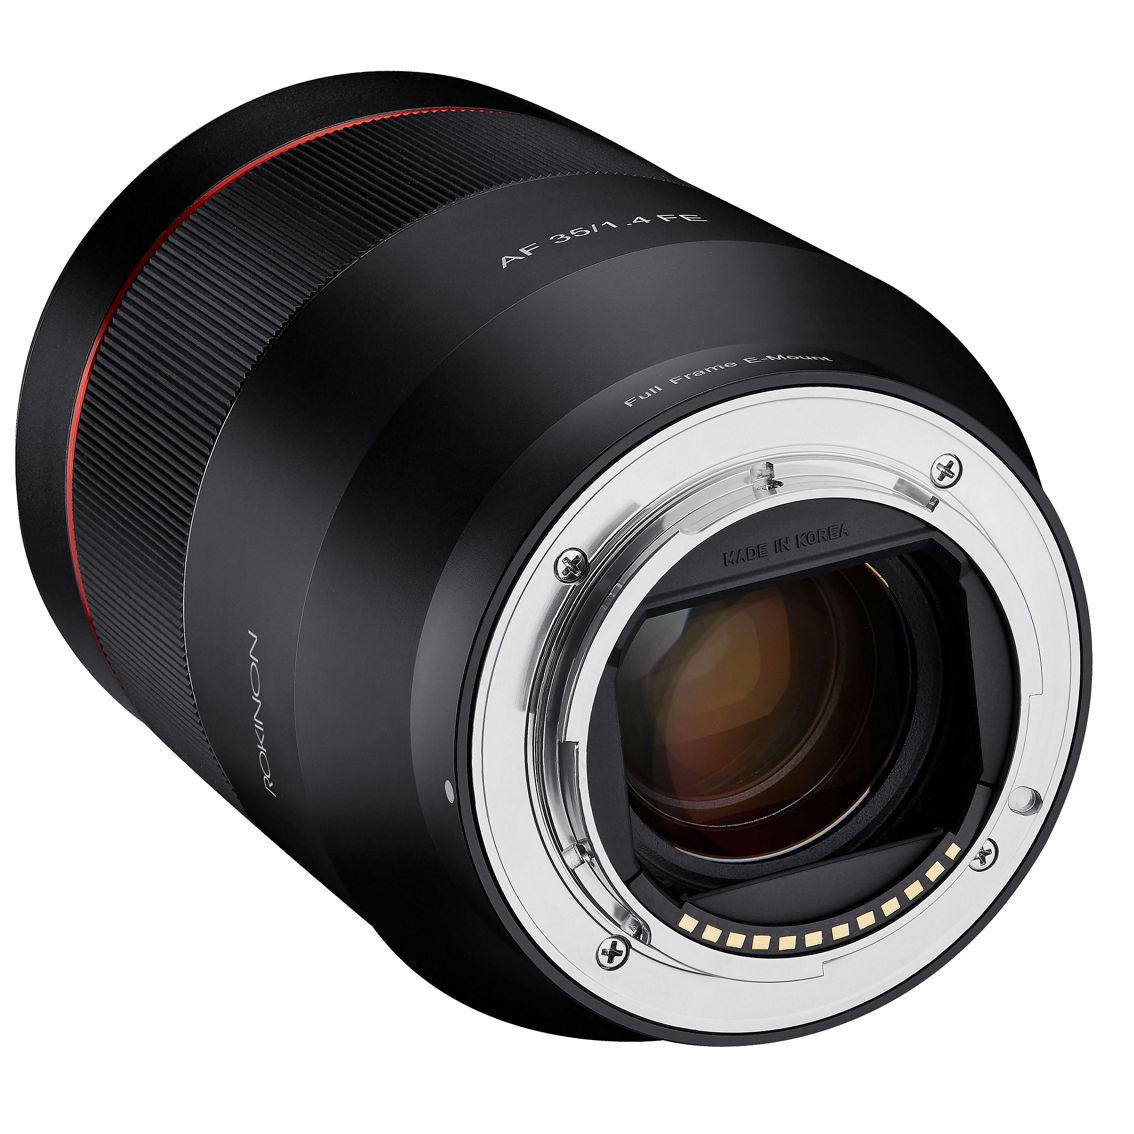 Rokinon 35mm F1.4 AF Full Frame Wide Angle Lens for Sony E - Image 4 of 5